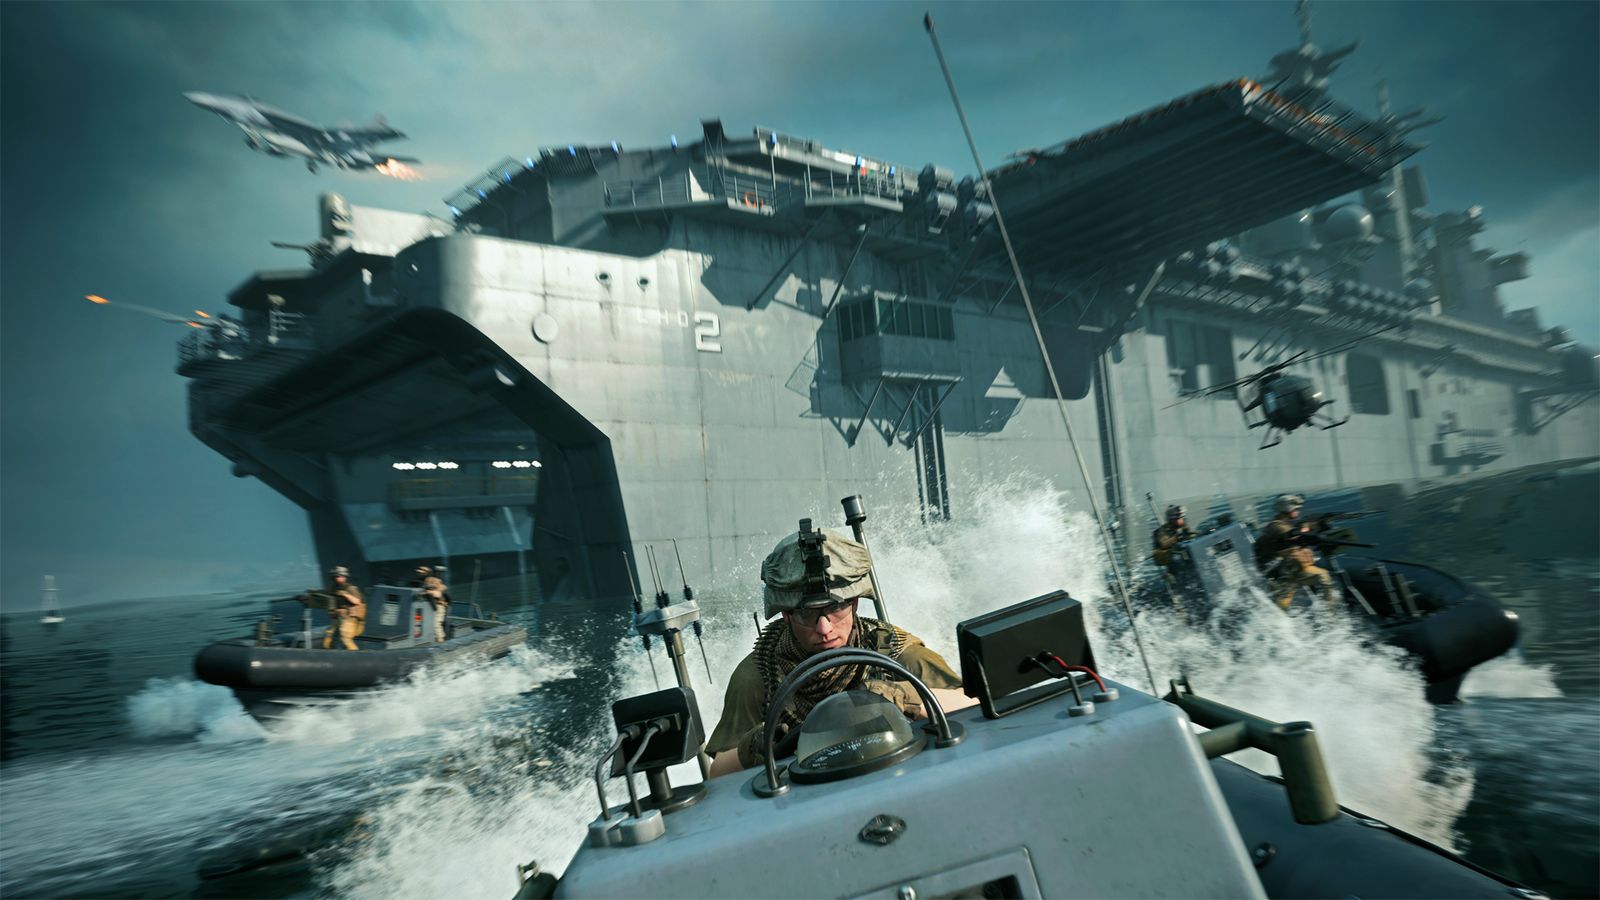 A soldier is driving a boat away from an airship fleet.